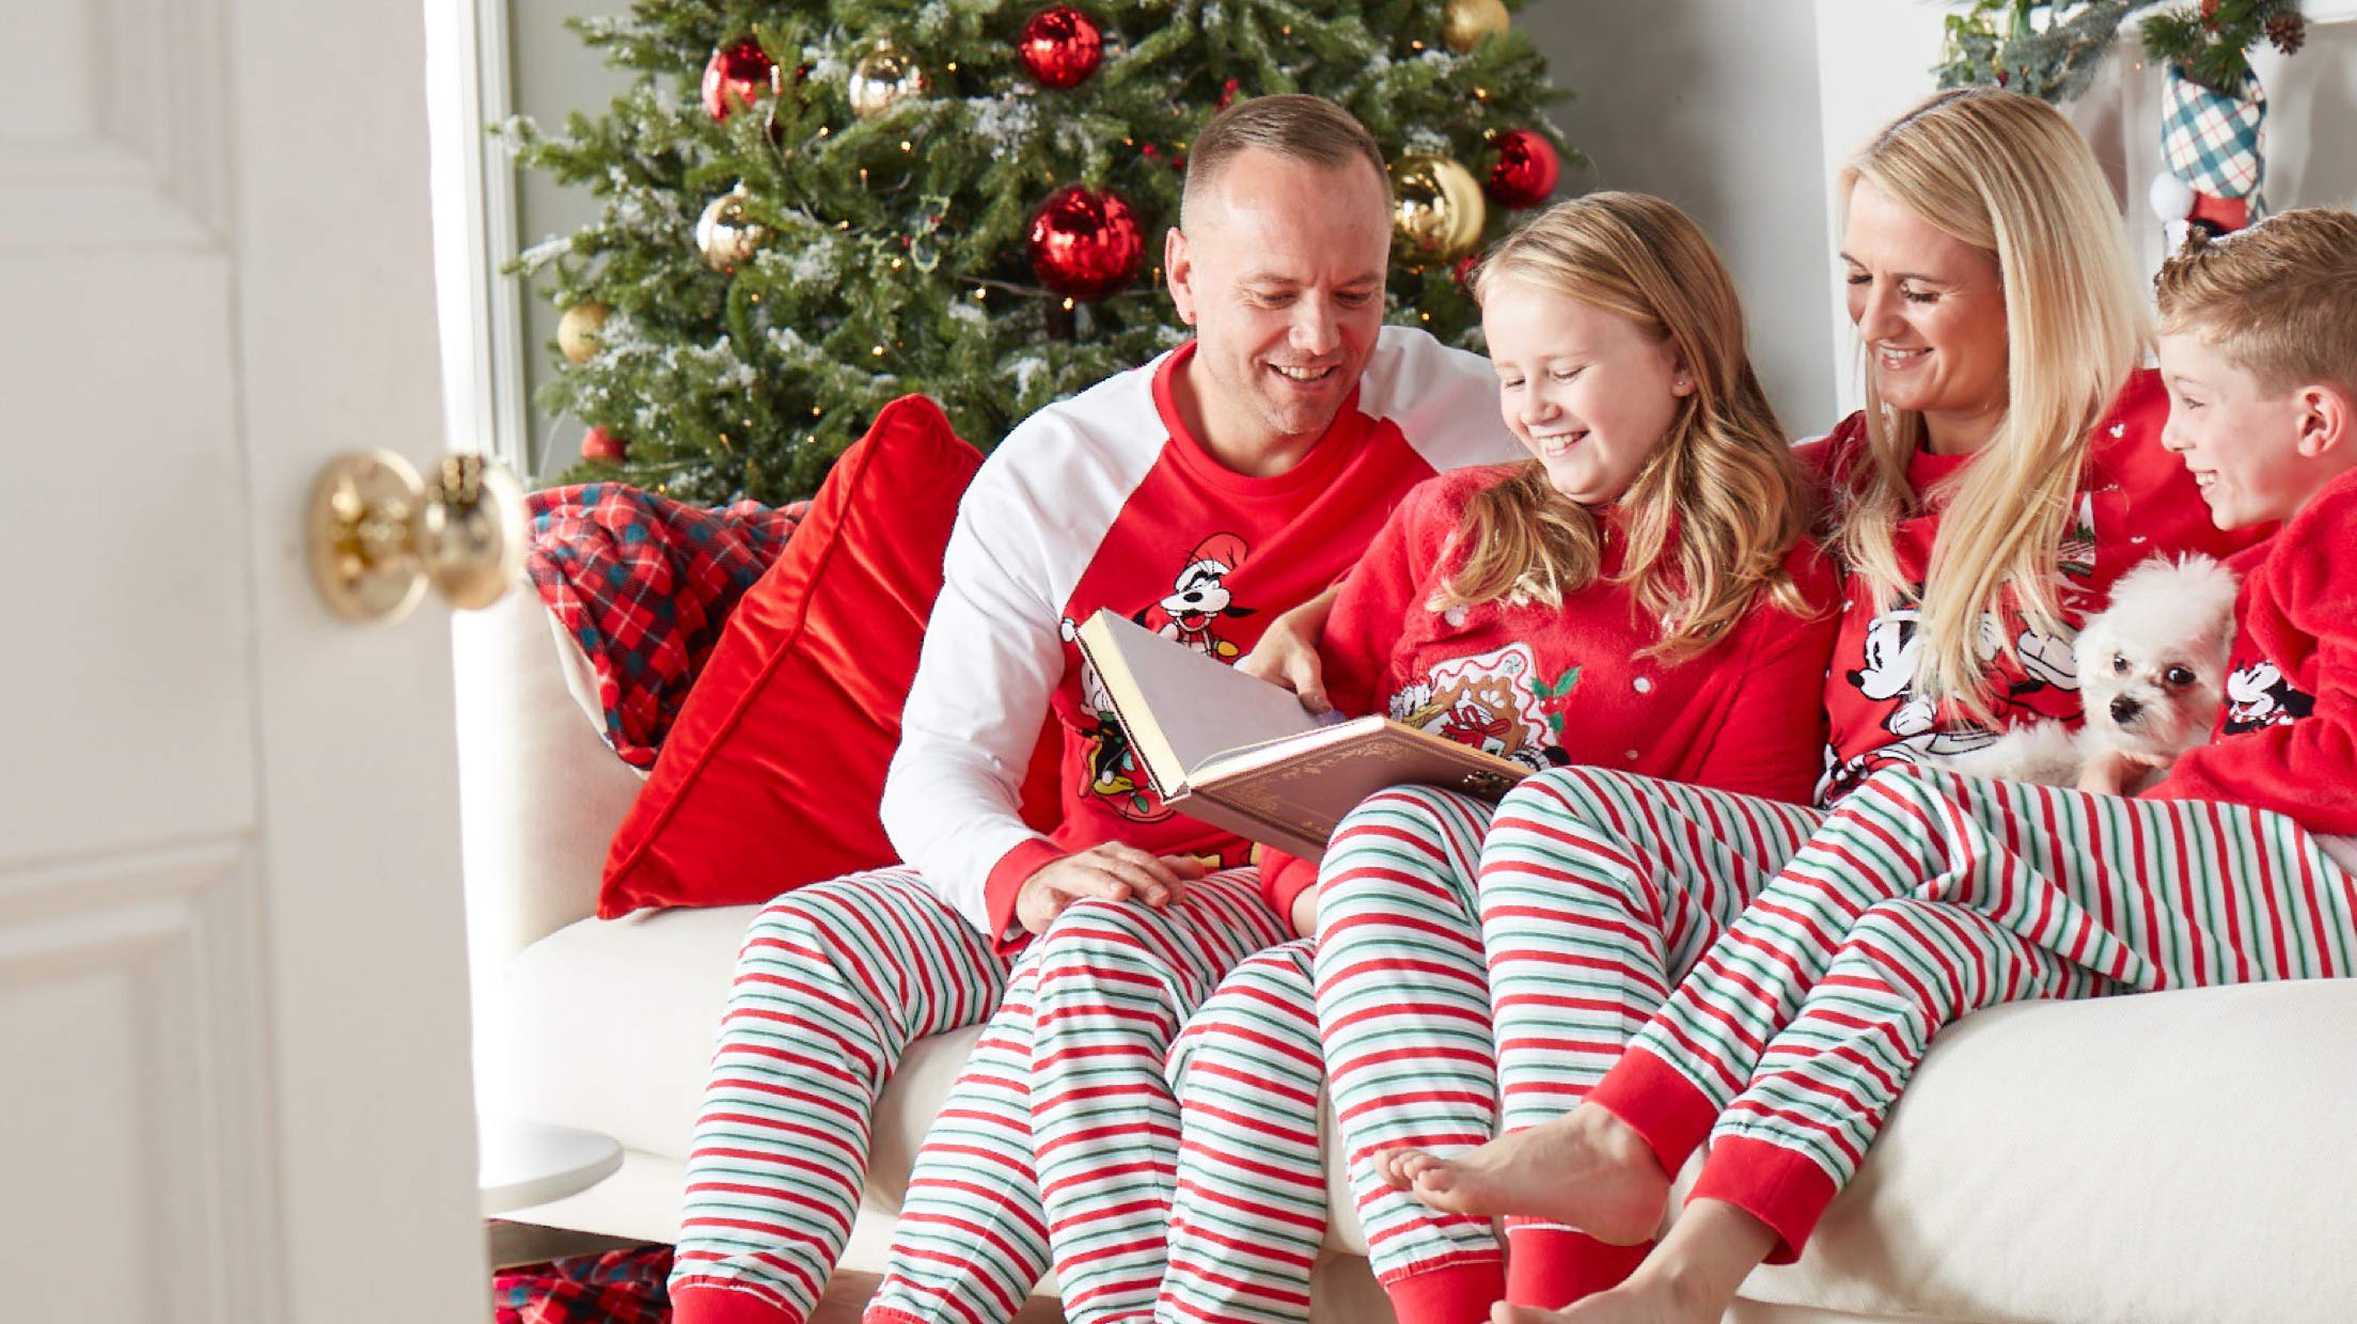 Make-A-Wish UK wish child Isla and her family modelling Disney’s festive collection in support of Make-A-Wish.